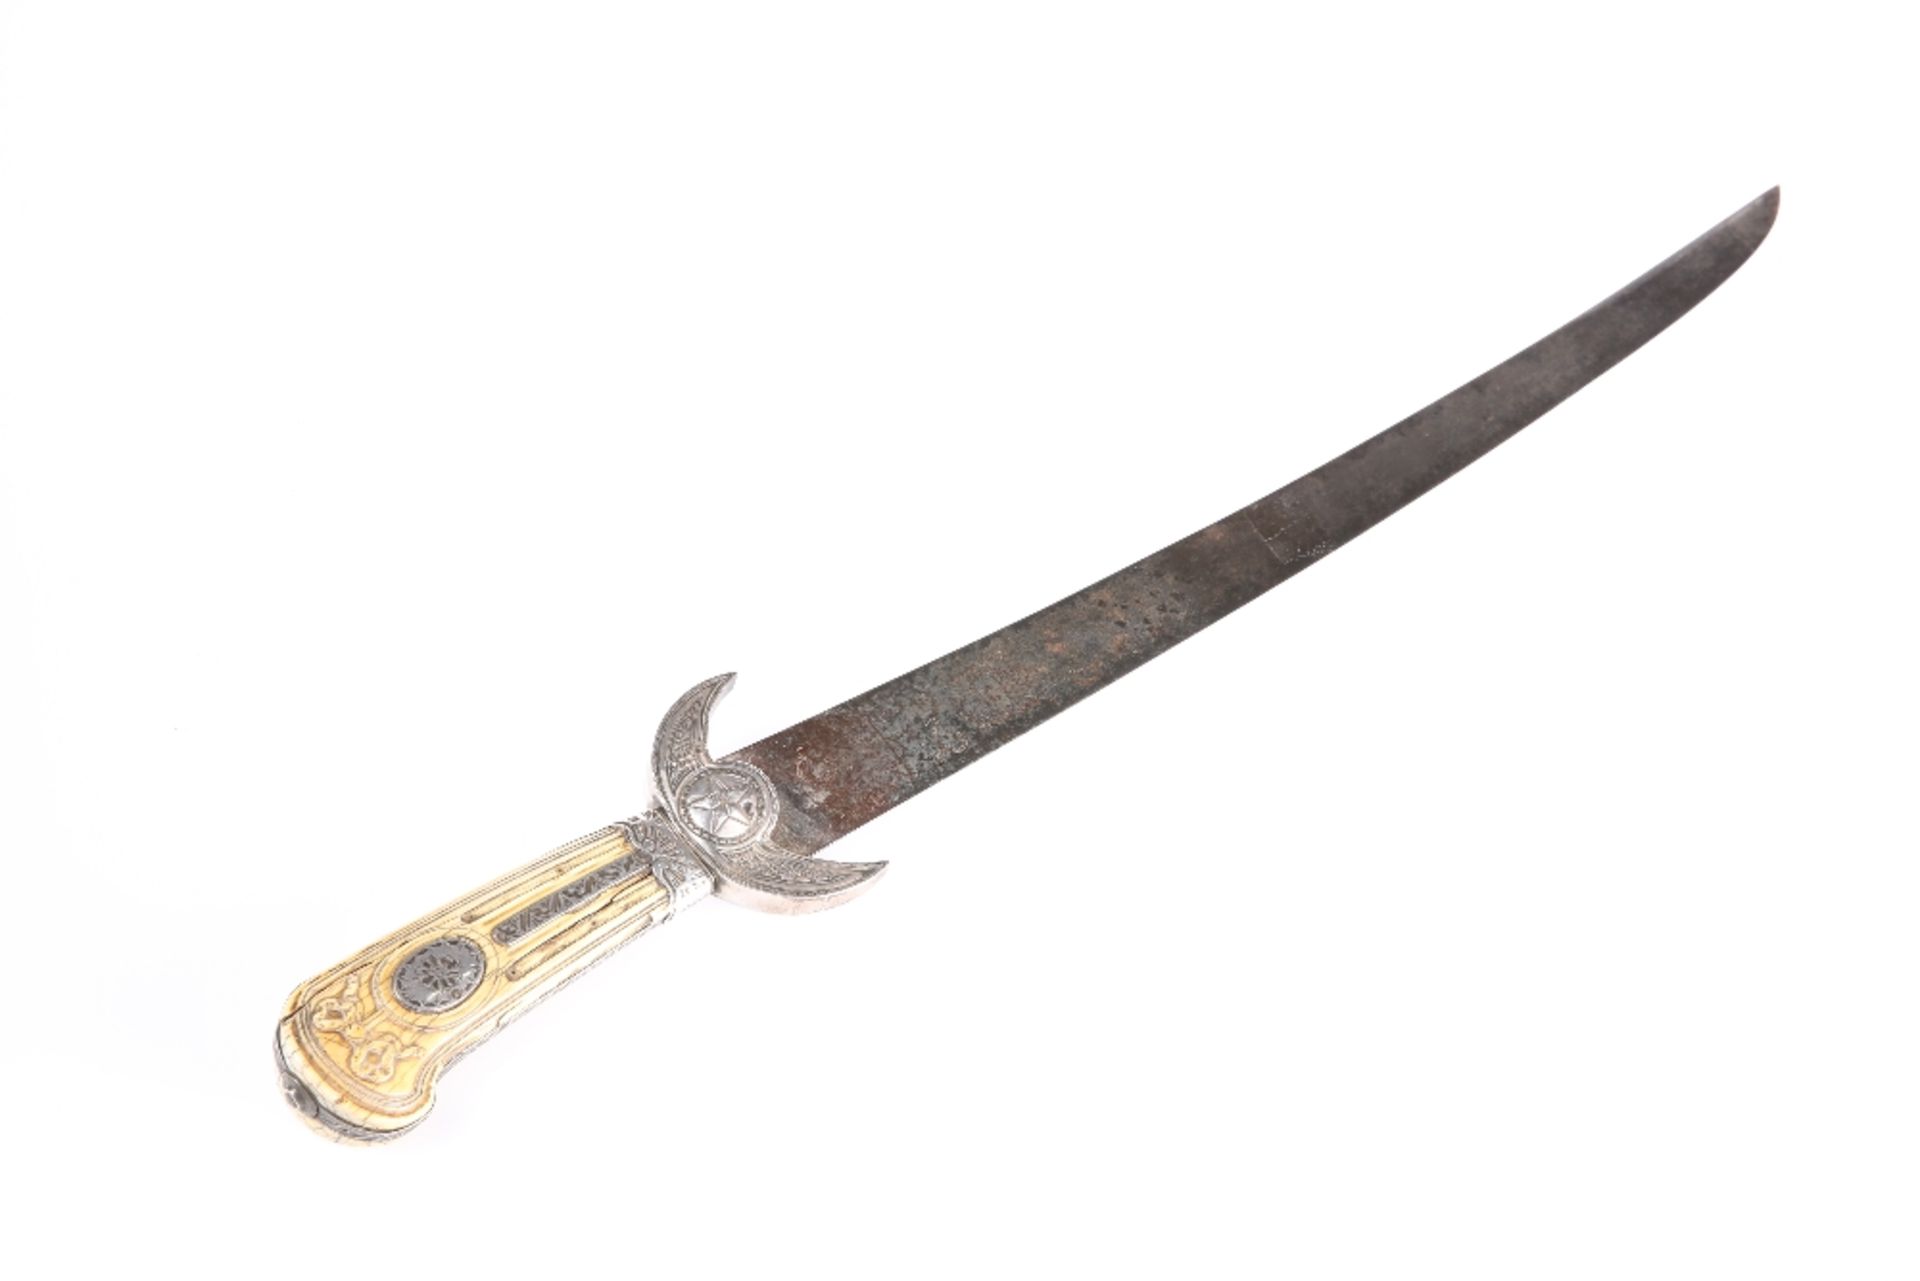 AN OTTOMAN EMPIRE SILVER-MOUNTED HUNTING SWORD